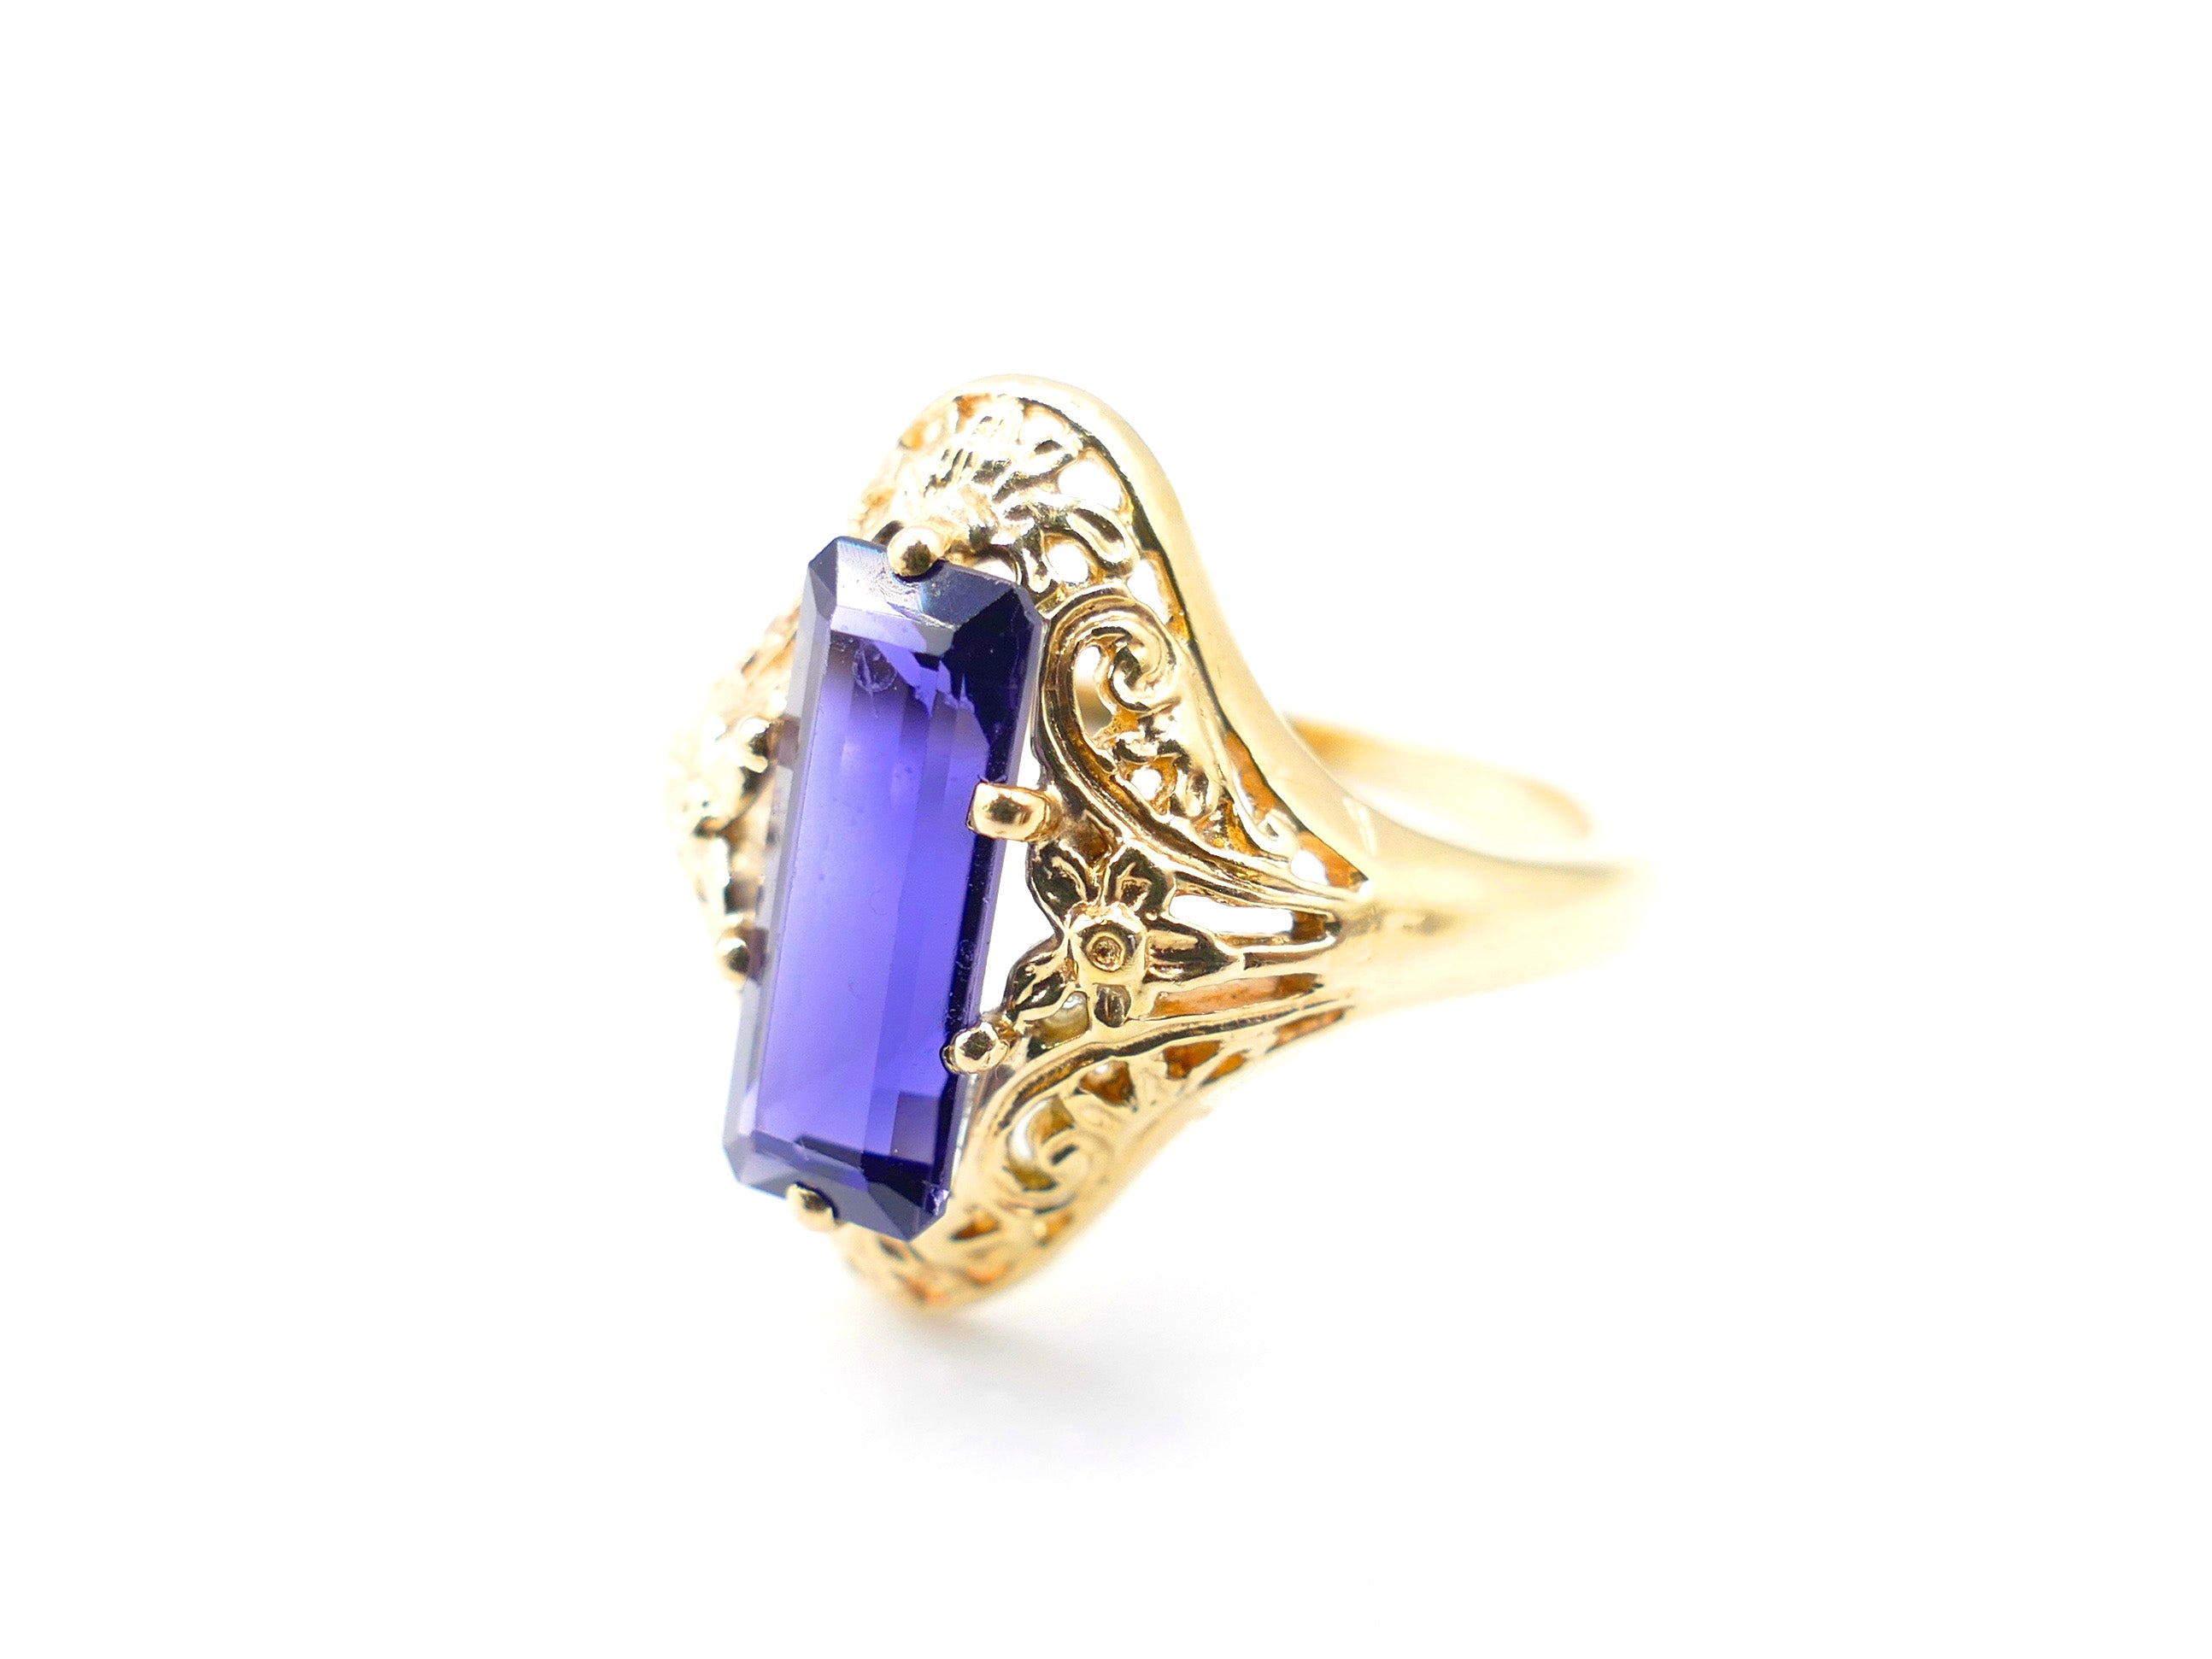 North-South Emerald Cut Iolite and Yellow Gold Filigree Ring